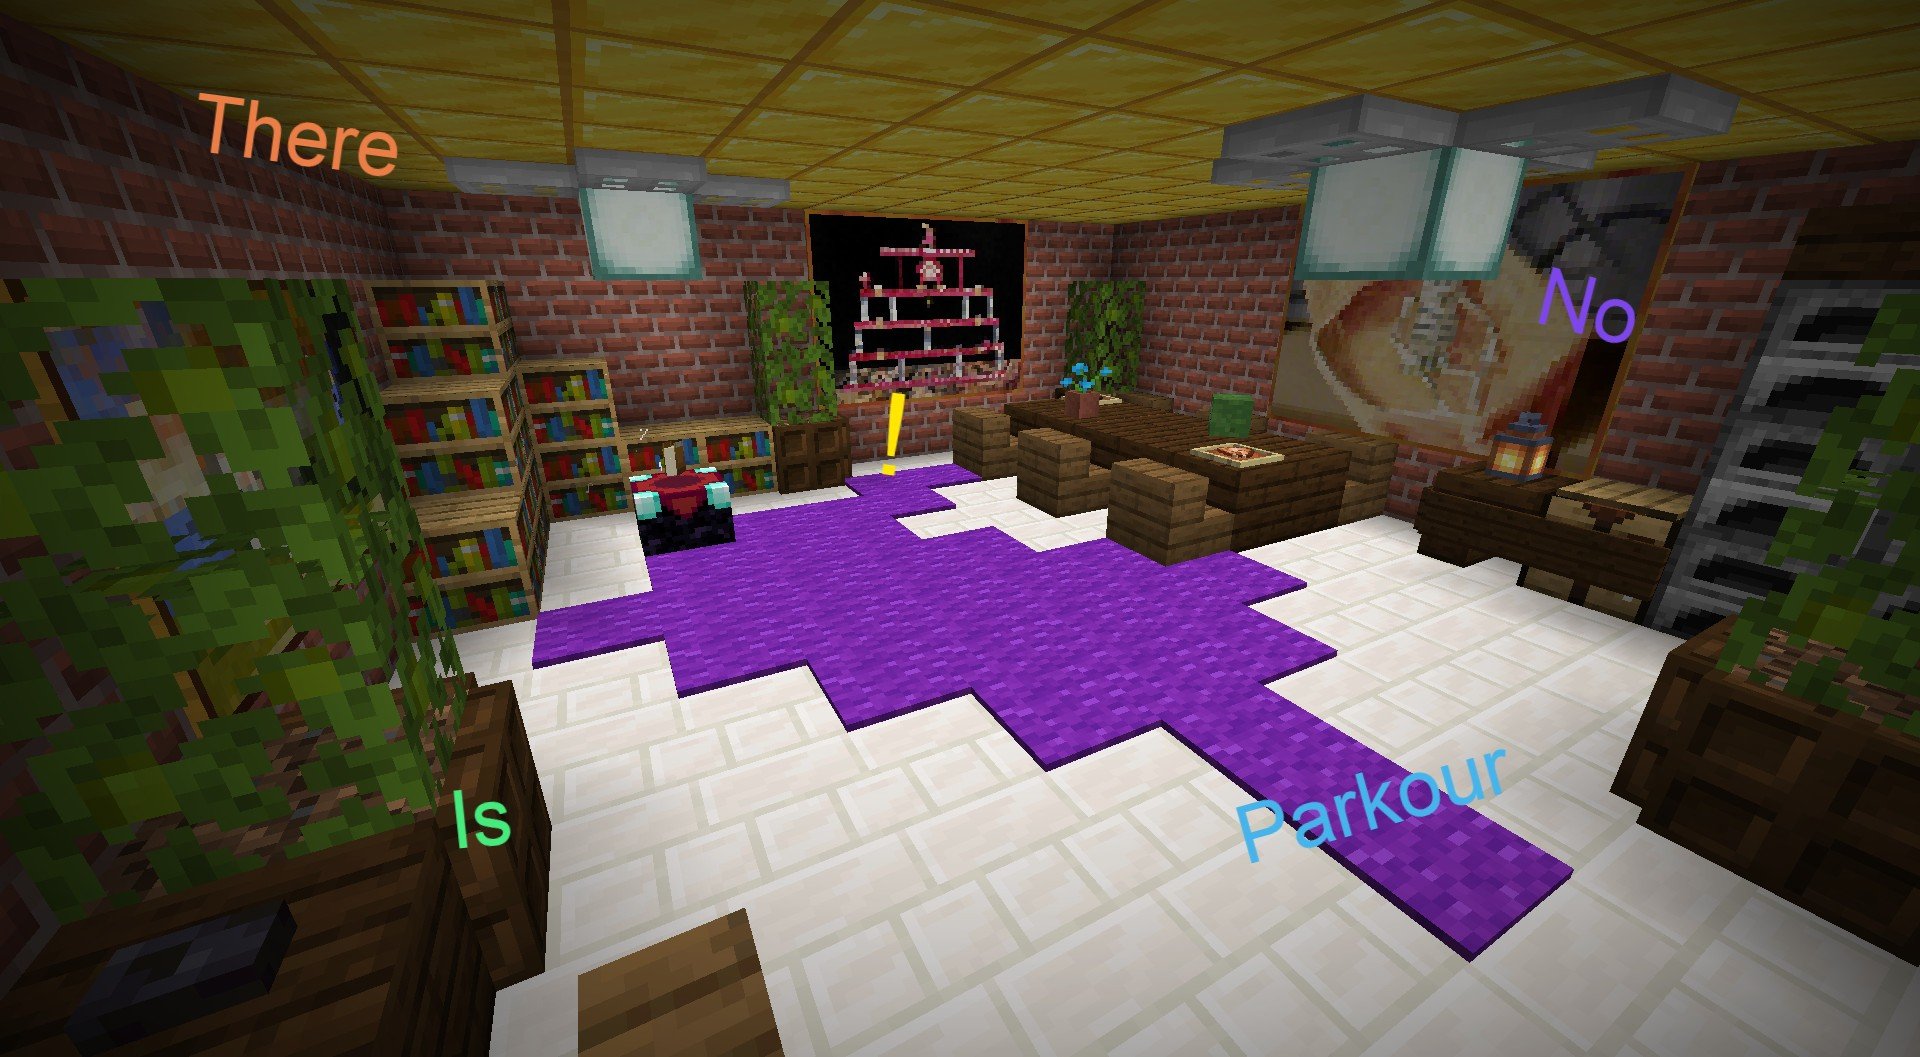 Download There Is No Parkour for Minecraft 1.16